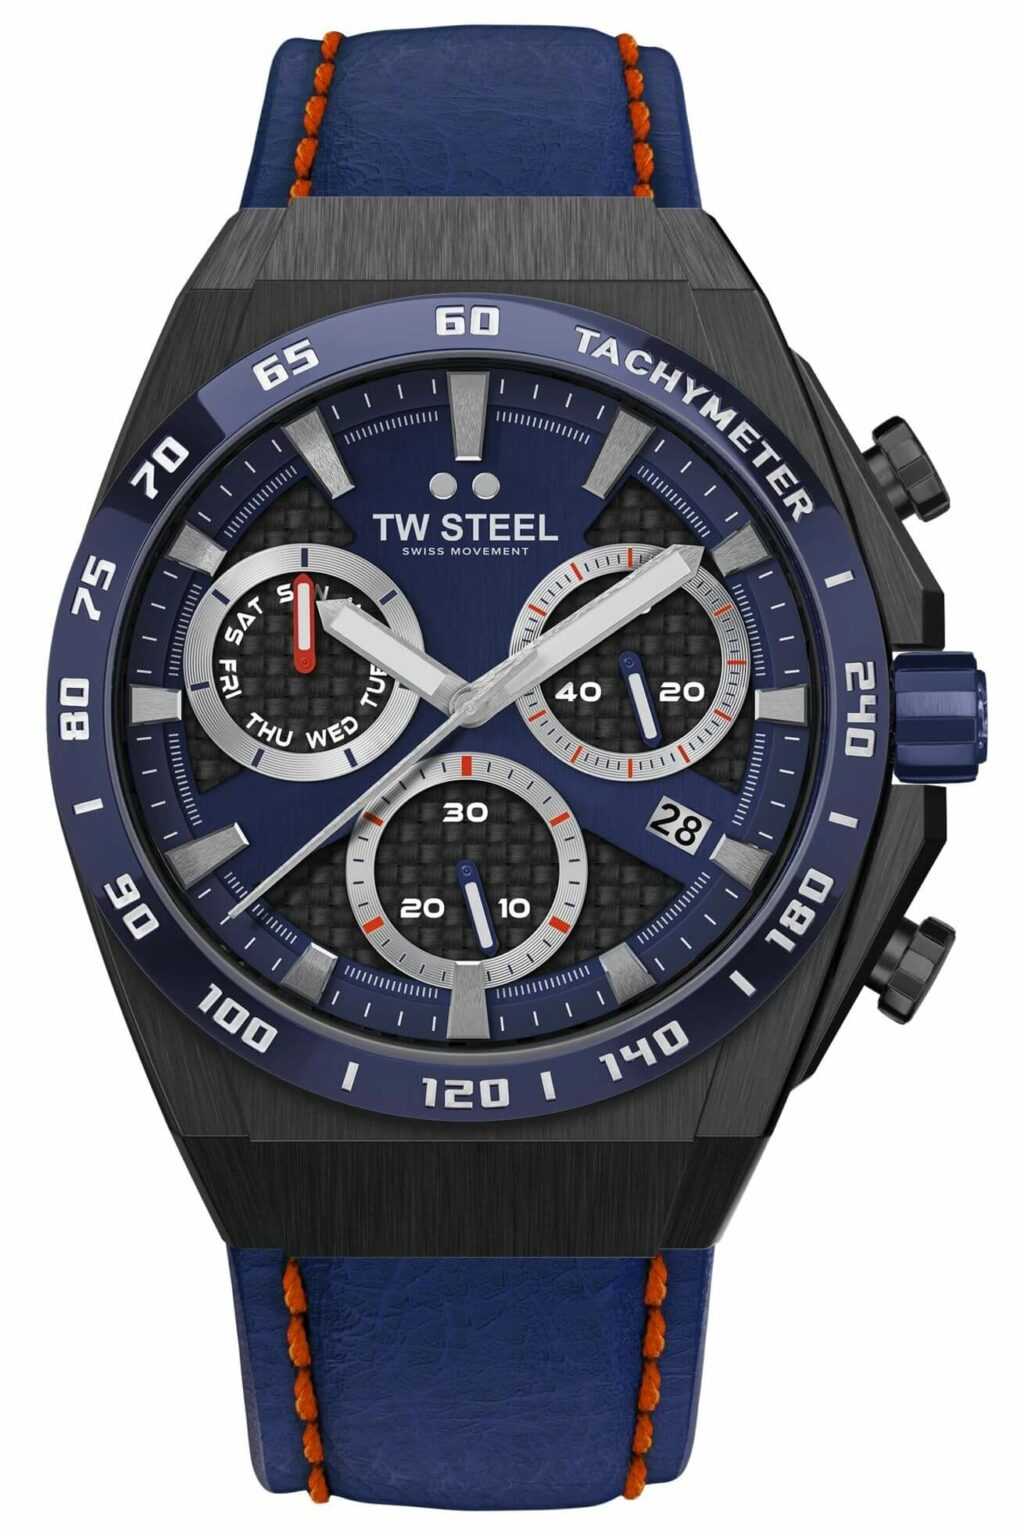 TW STEEL -Fast Lane Special Edition 44mm- CE4072